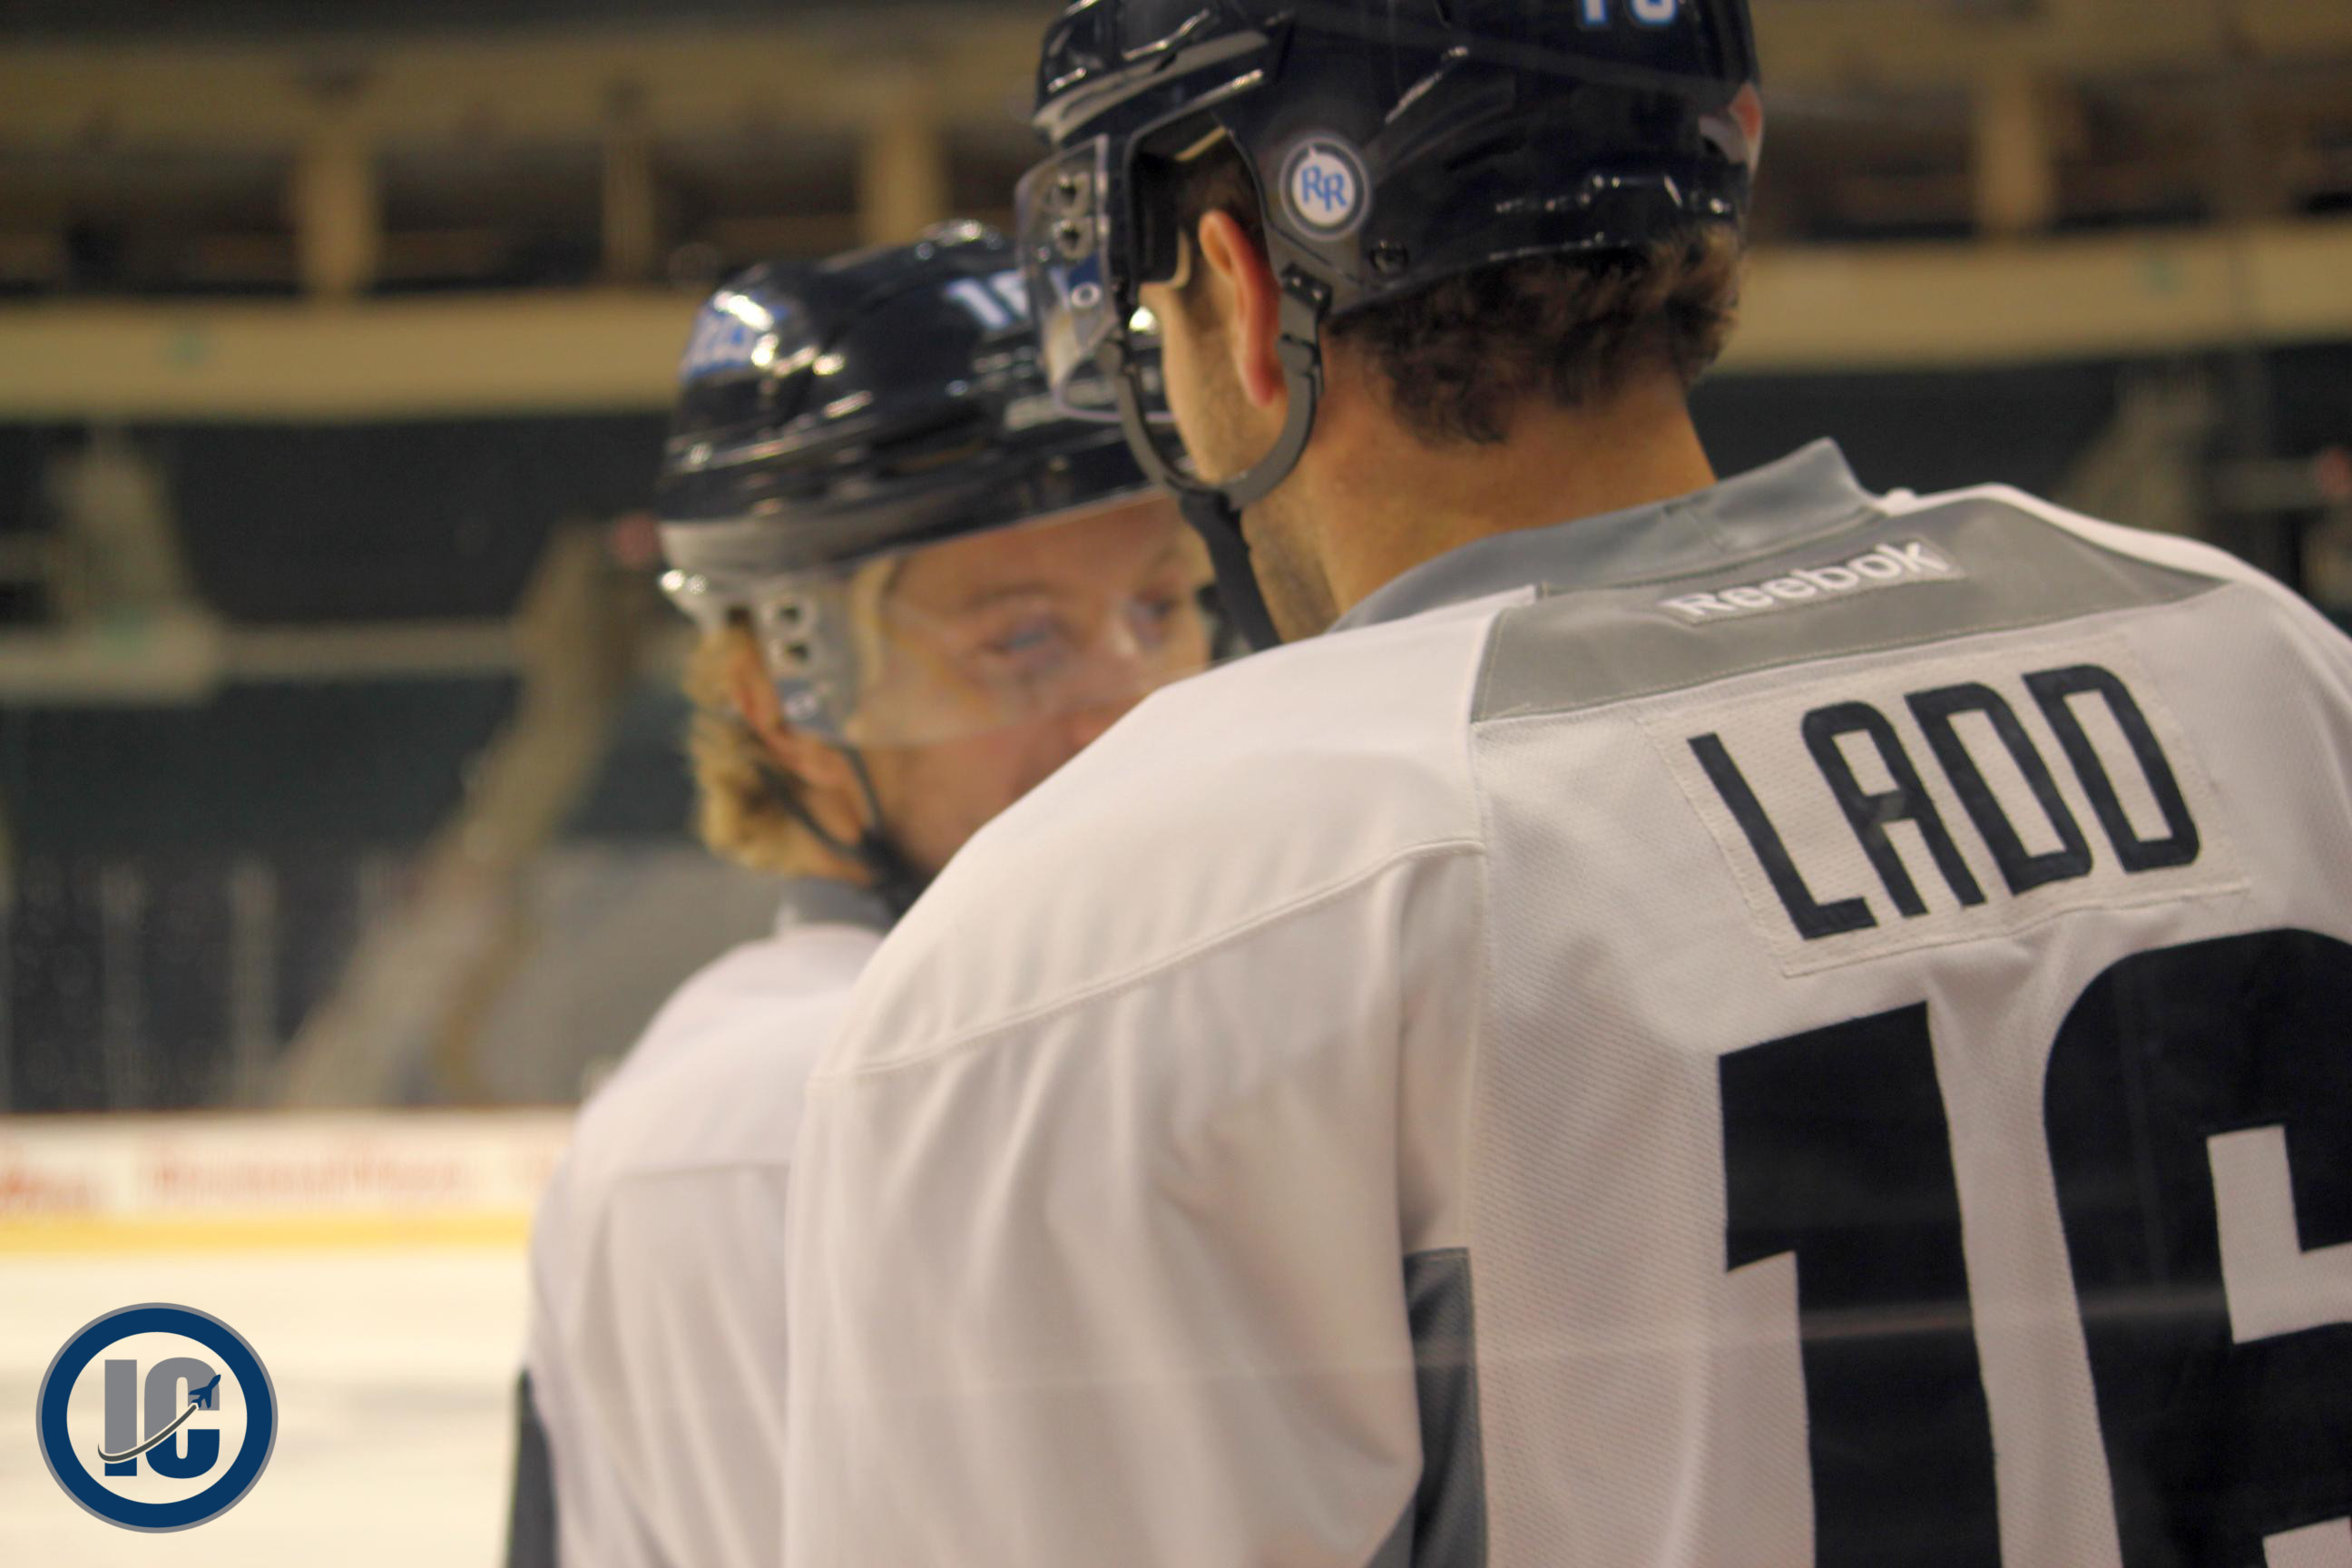 Ladd and Little at practice